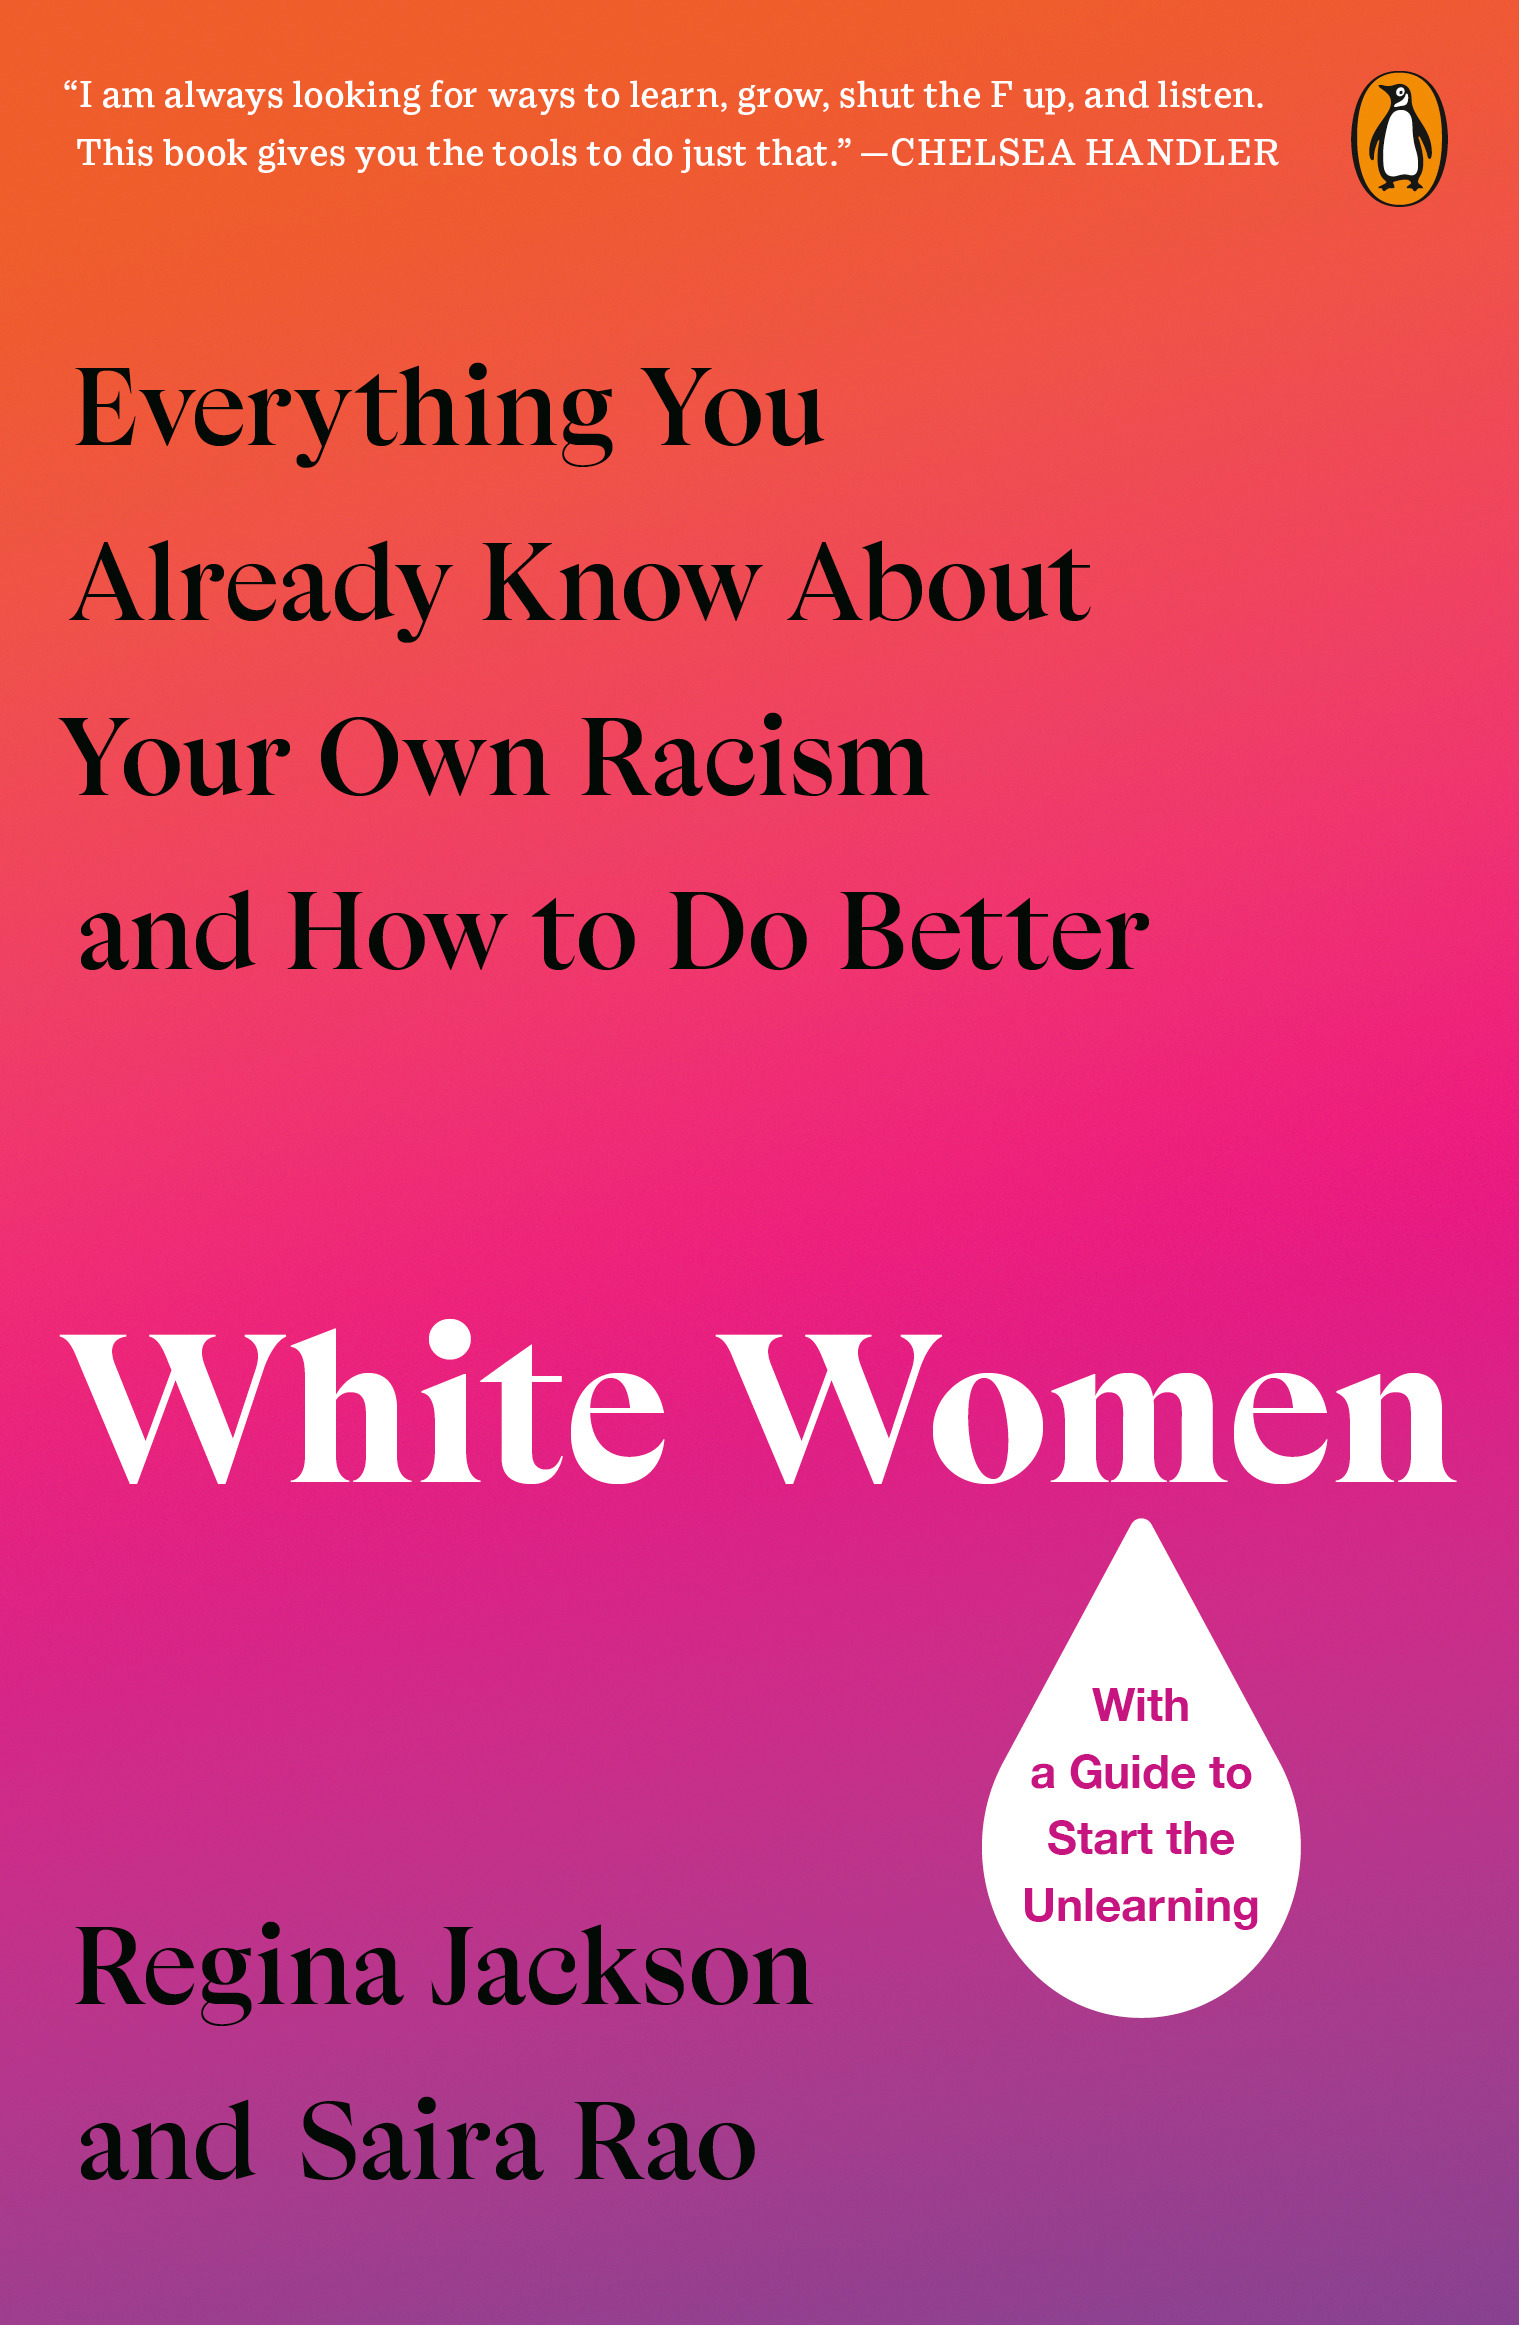 White Women : Everything You Already Know About Your Own Racism and How to Do Better | Jackson, Regina